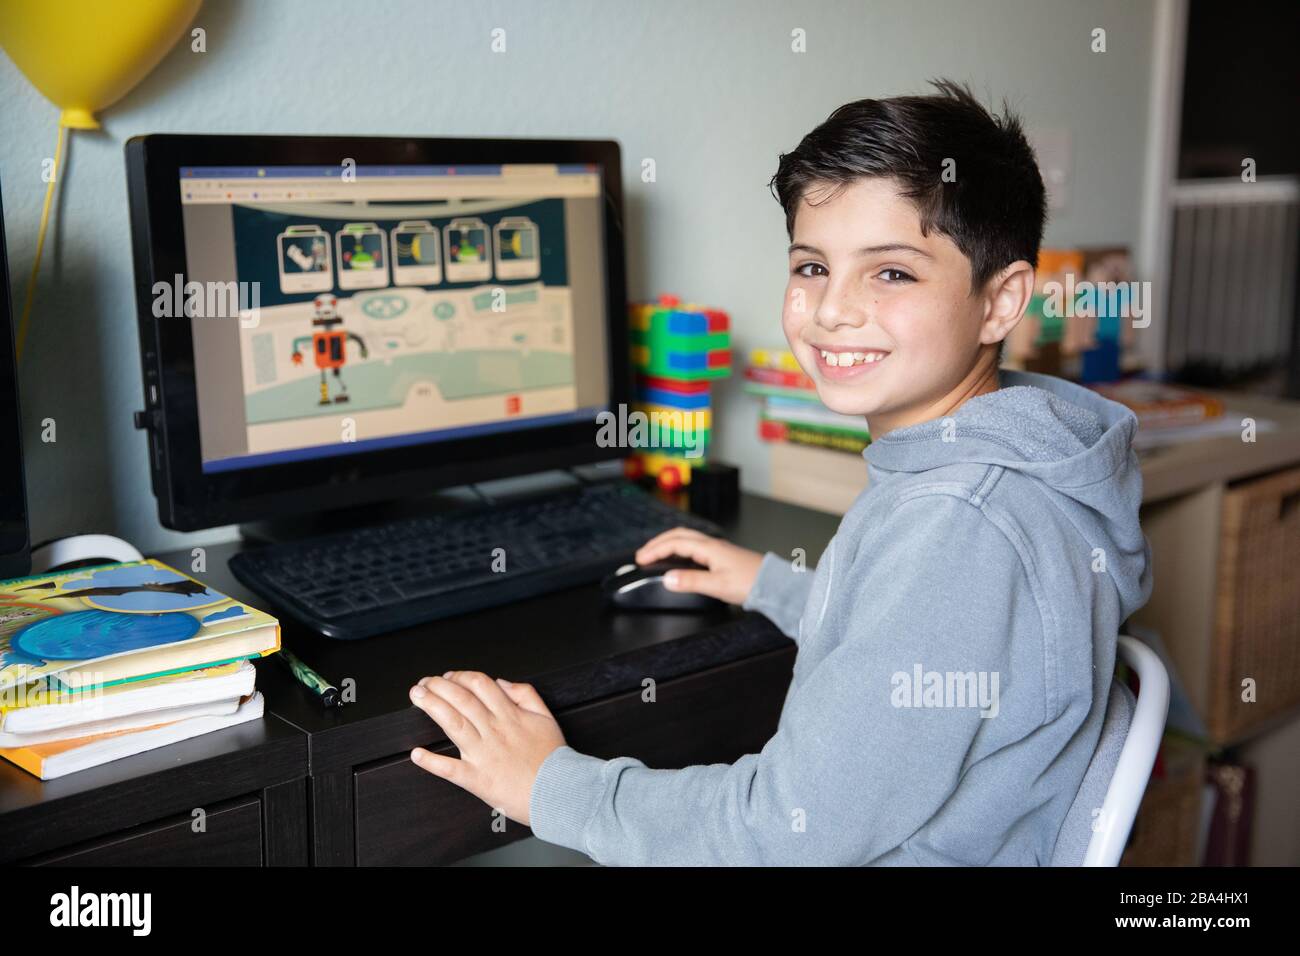 Cute young boy studying at home on computer due to school closures because of corona virus outbreak in the world. Stock Photo